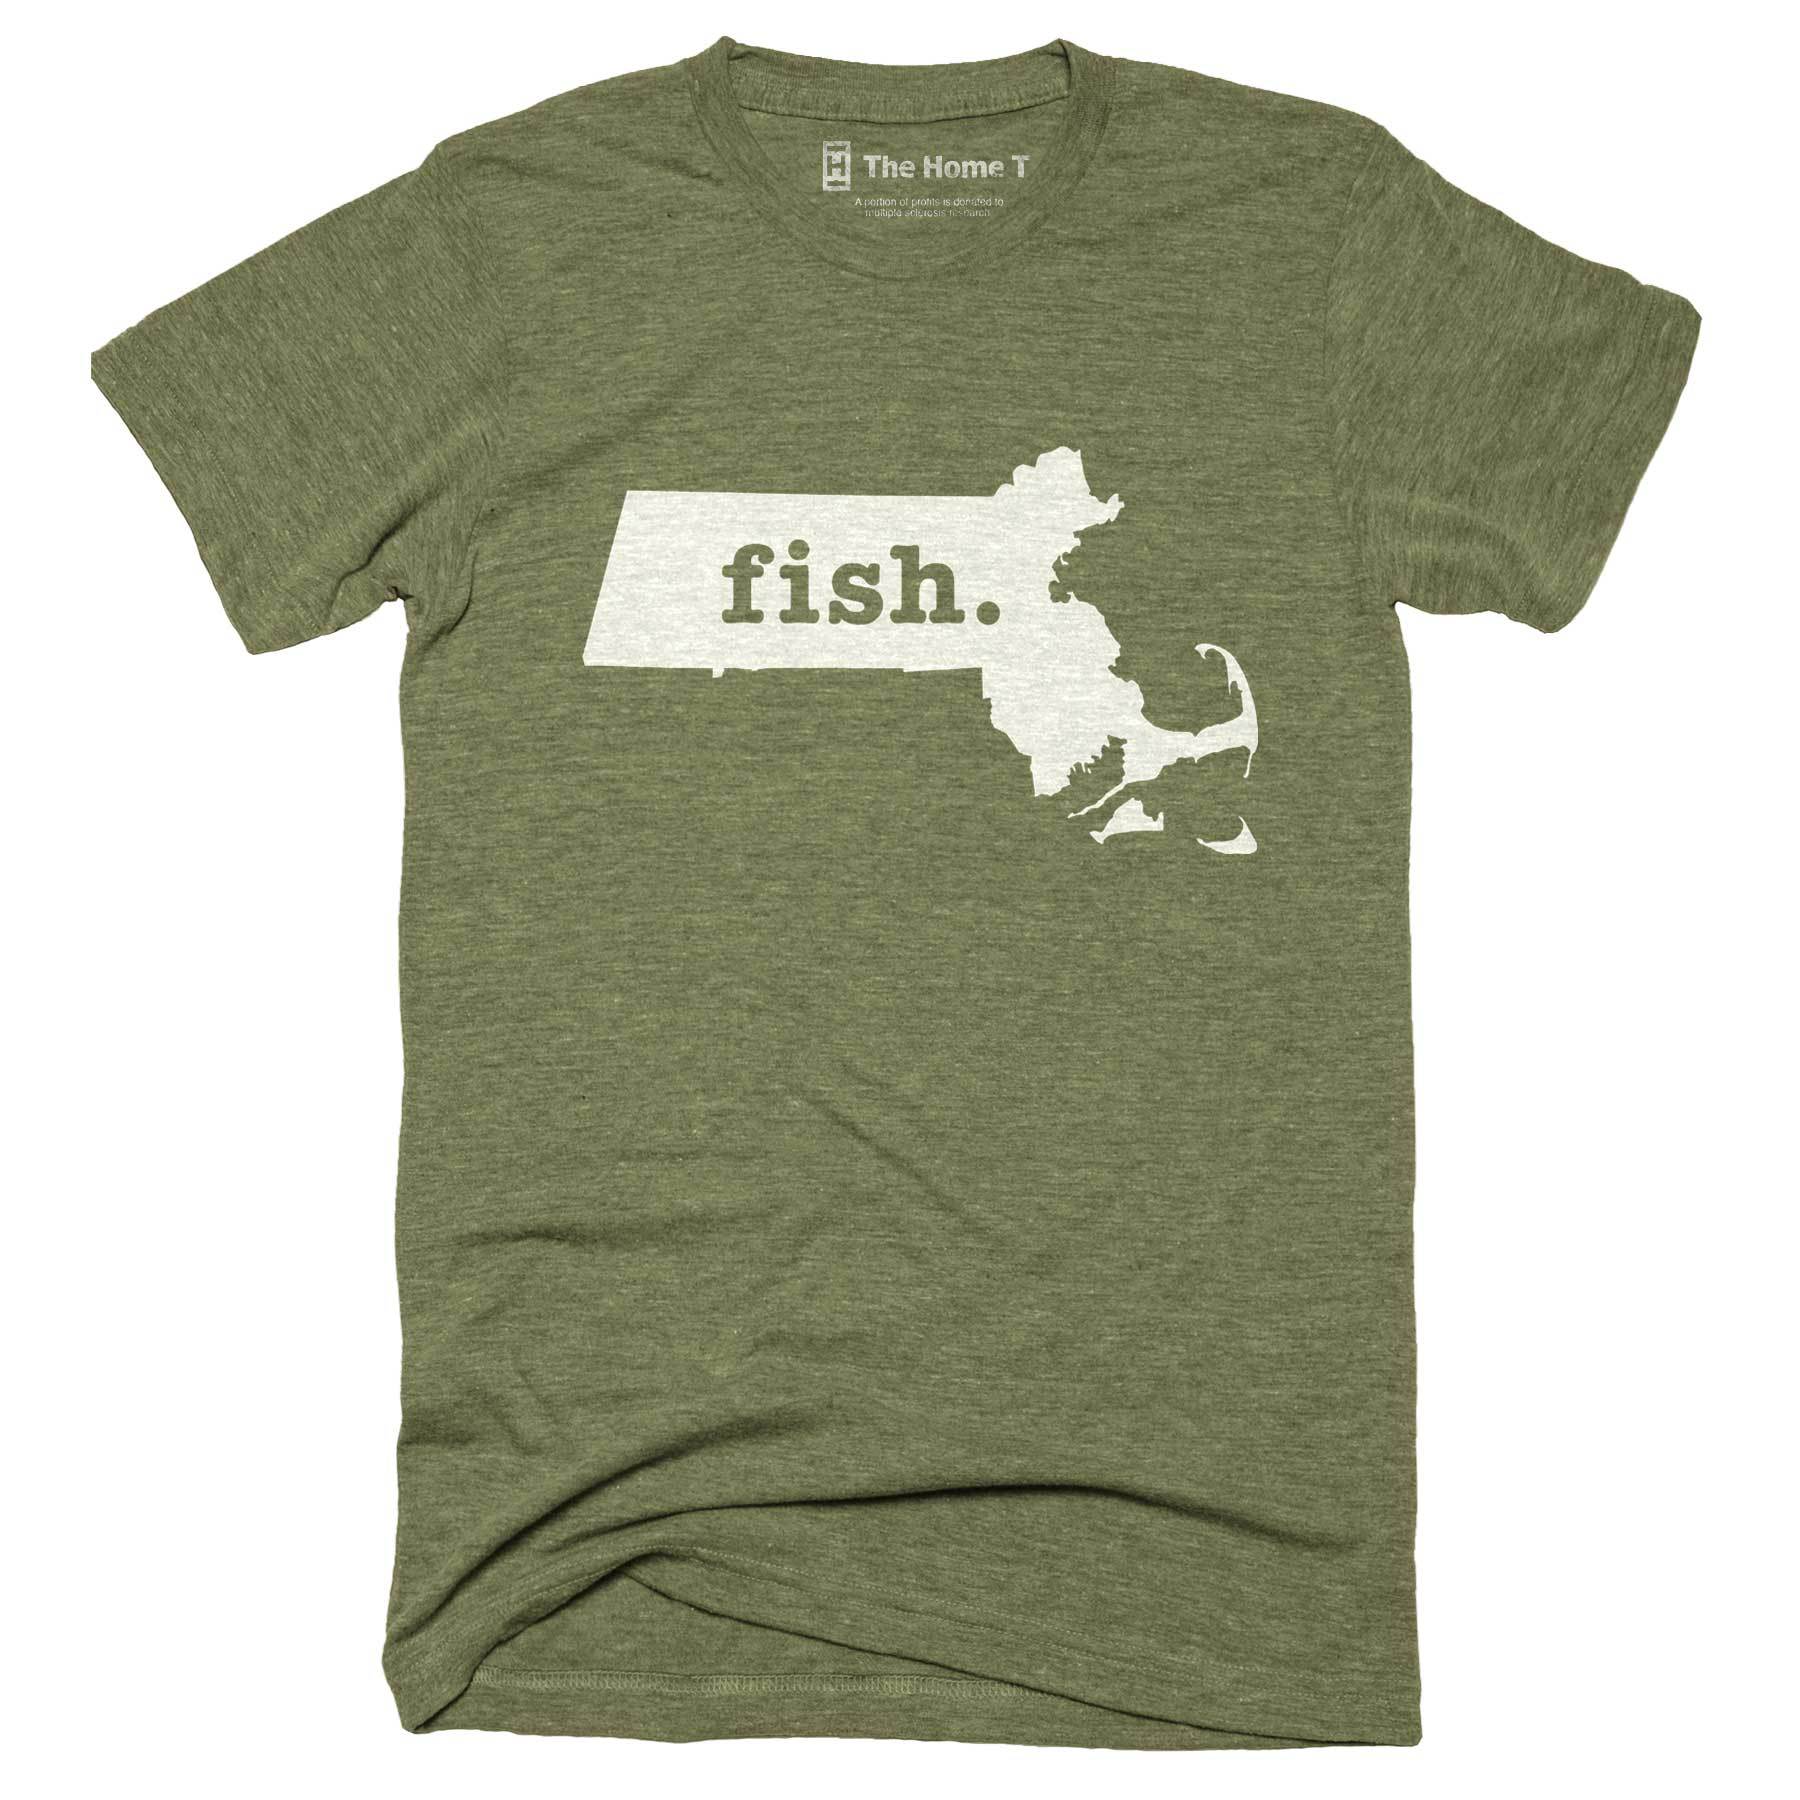 Massachusetts Fish Home T-Shirt Outdoor Collection The Home T XXL Army Green